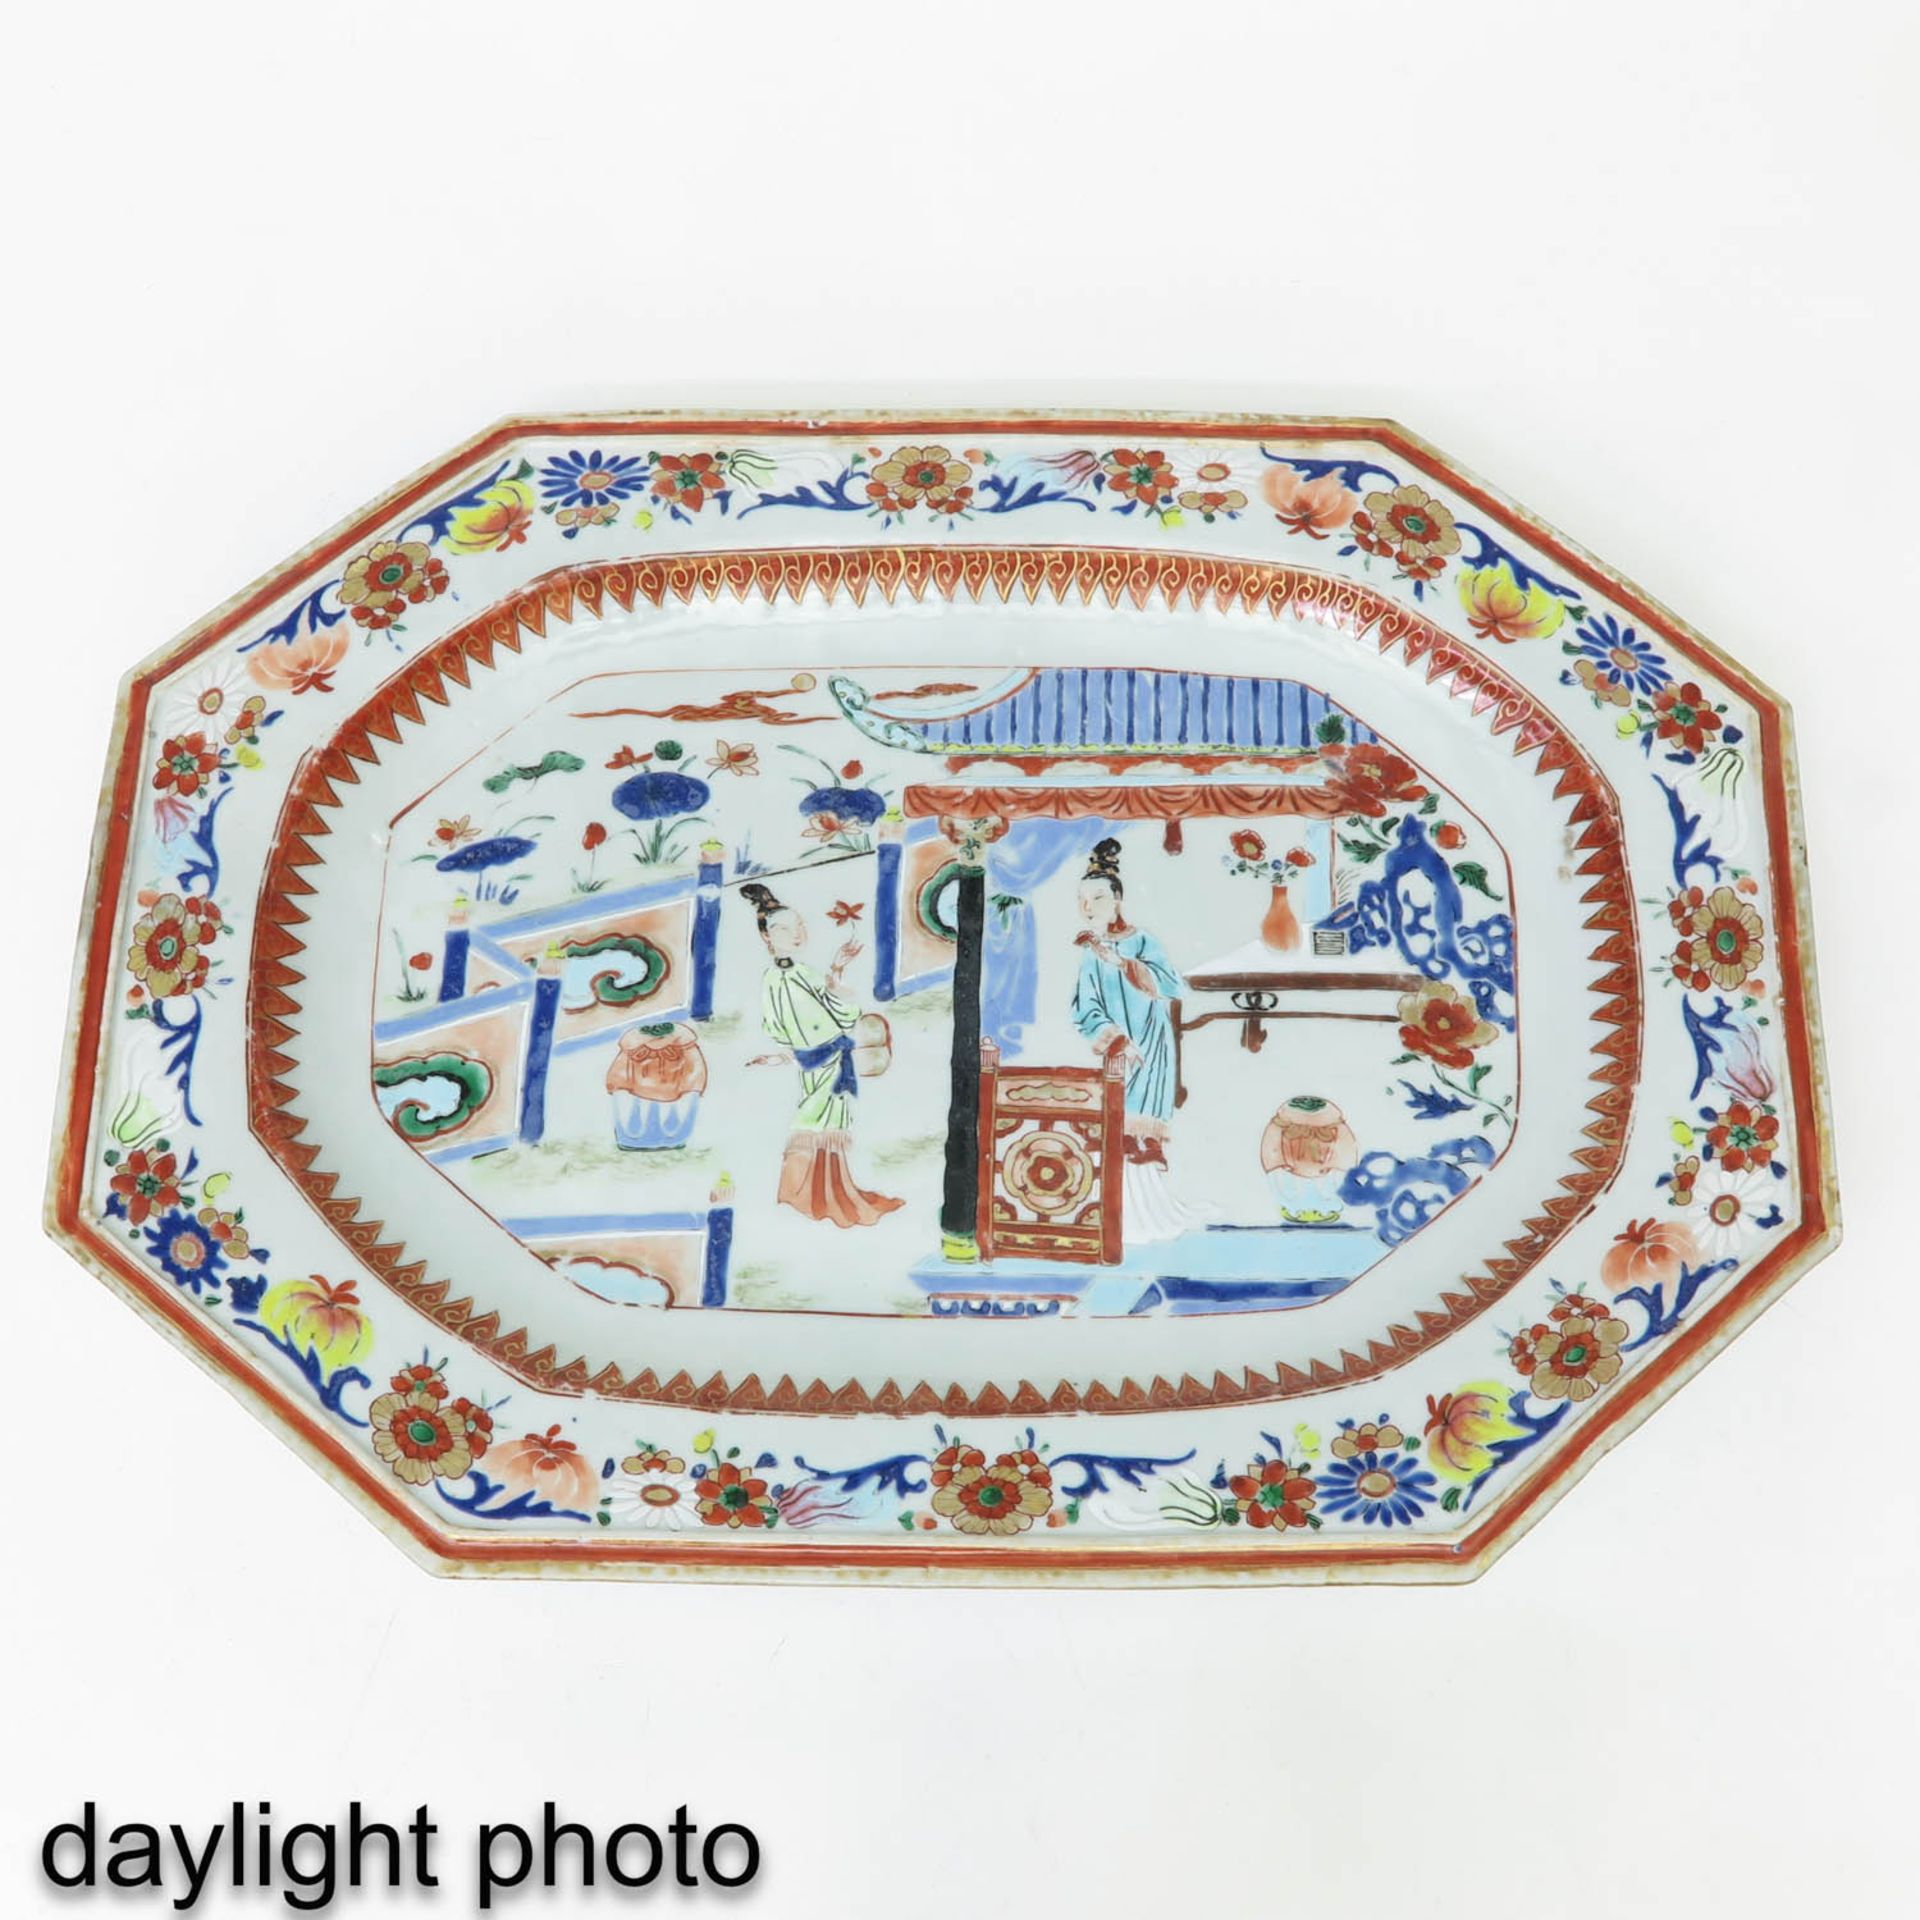 A Polychrome Decor Serving Tray - Image 5 of 7